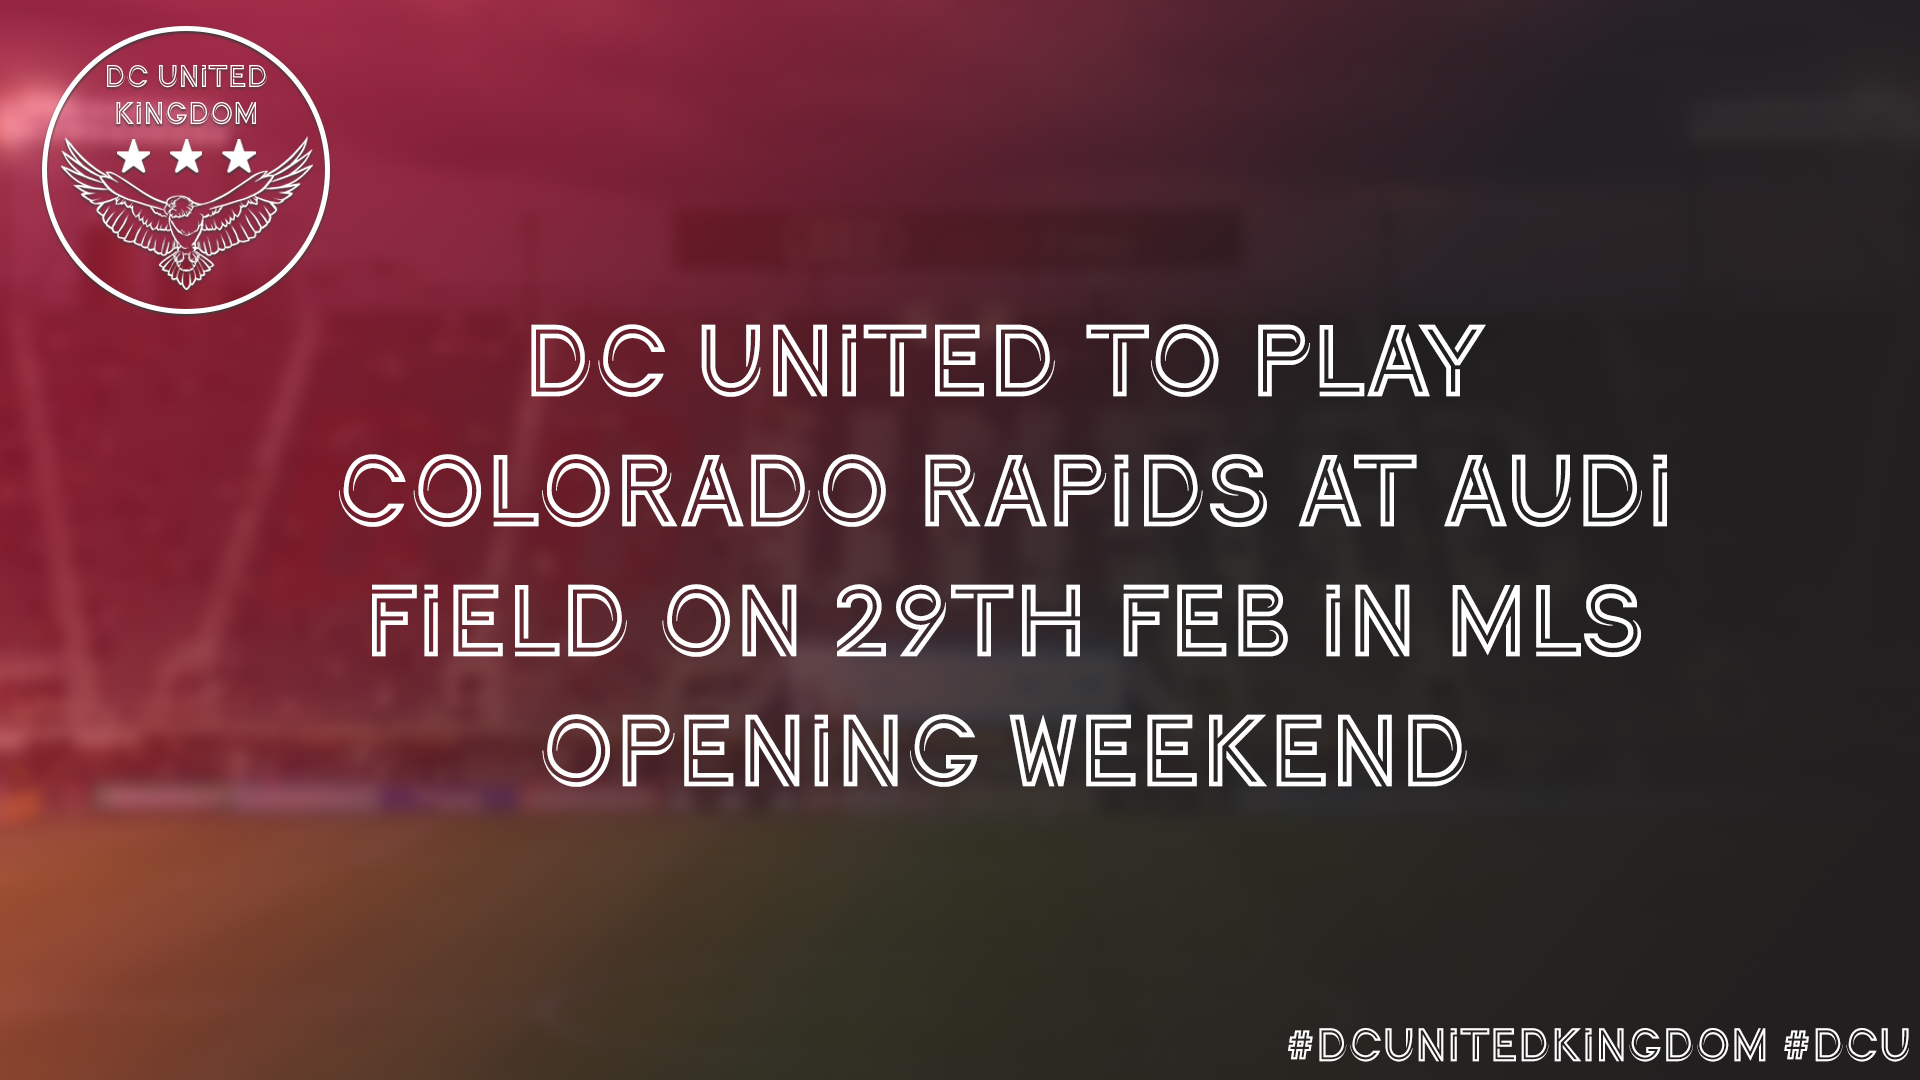 DC United to play Colorado Rapids in home opener